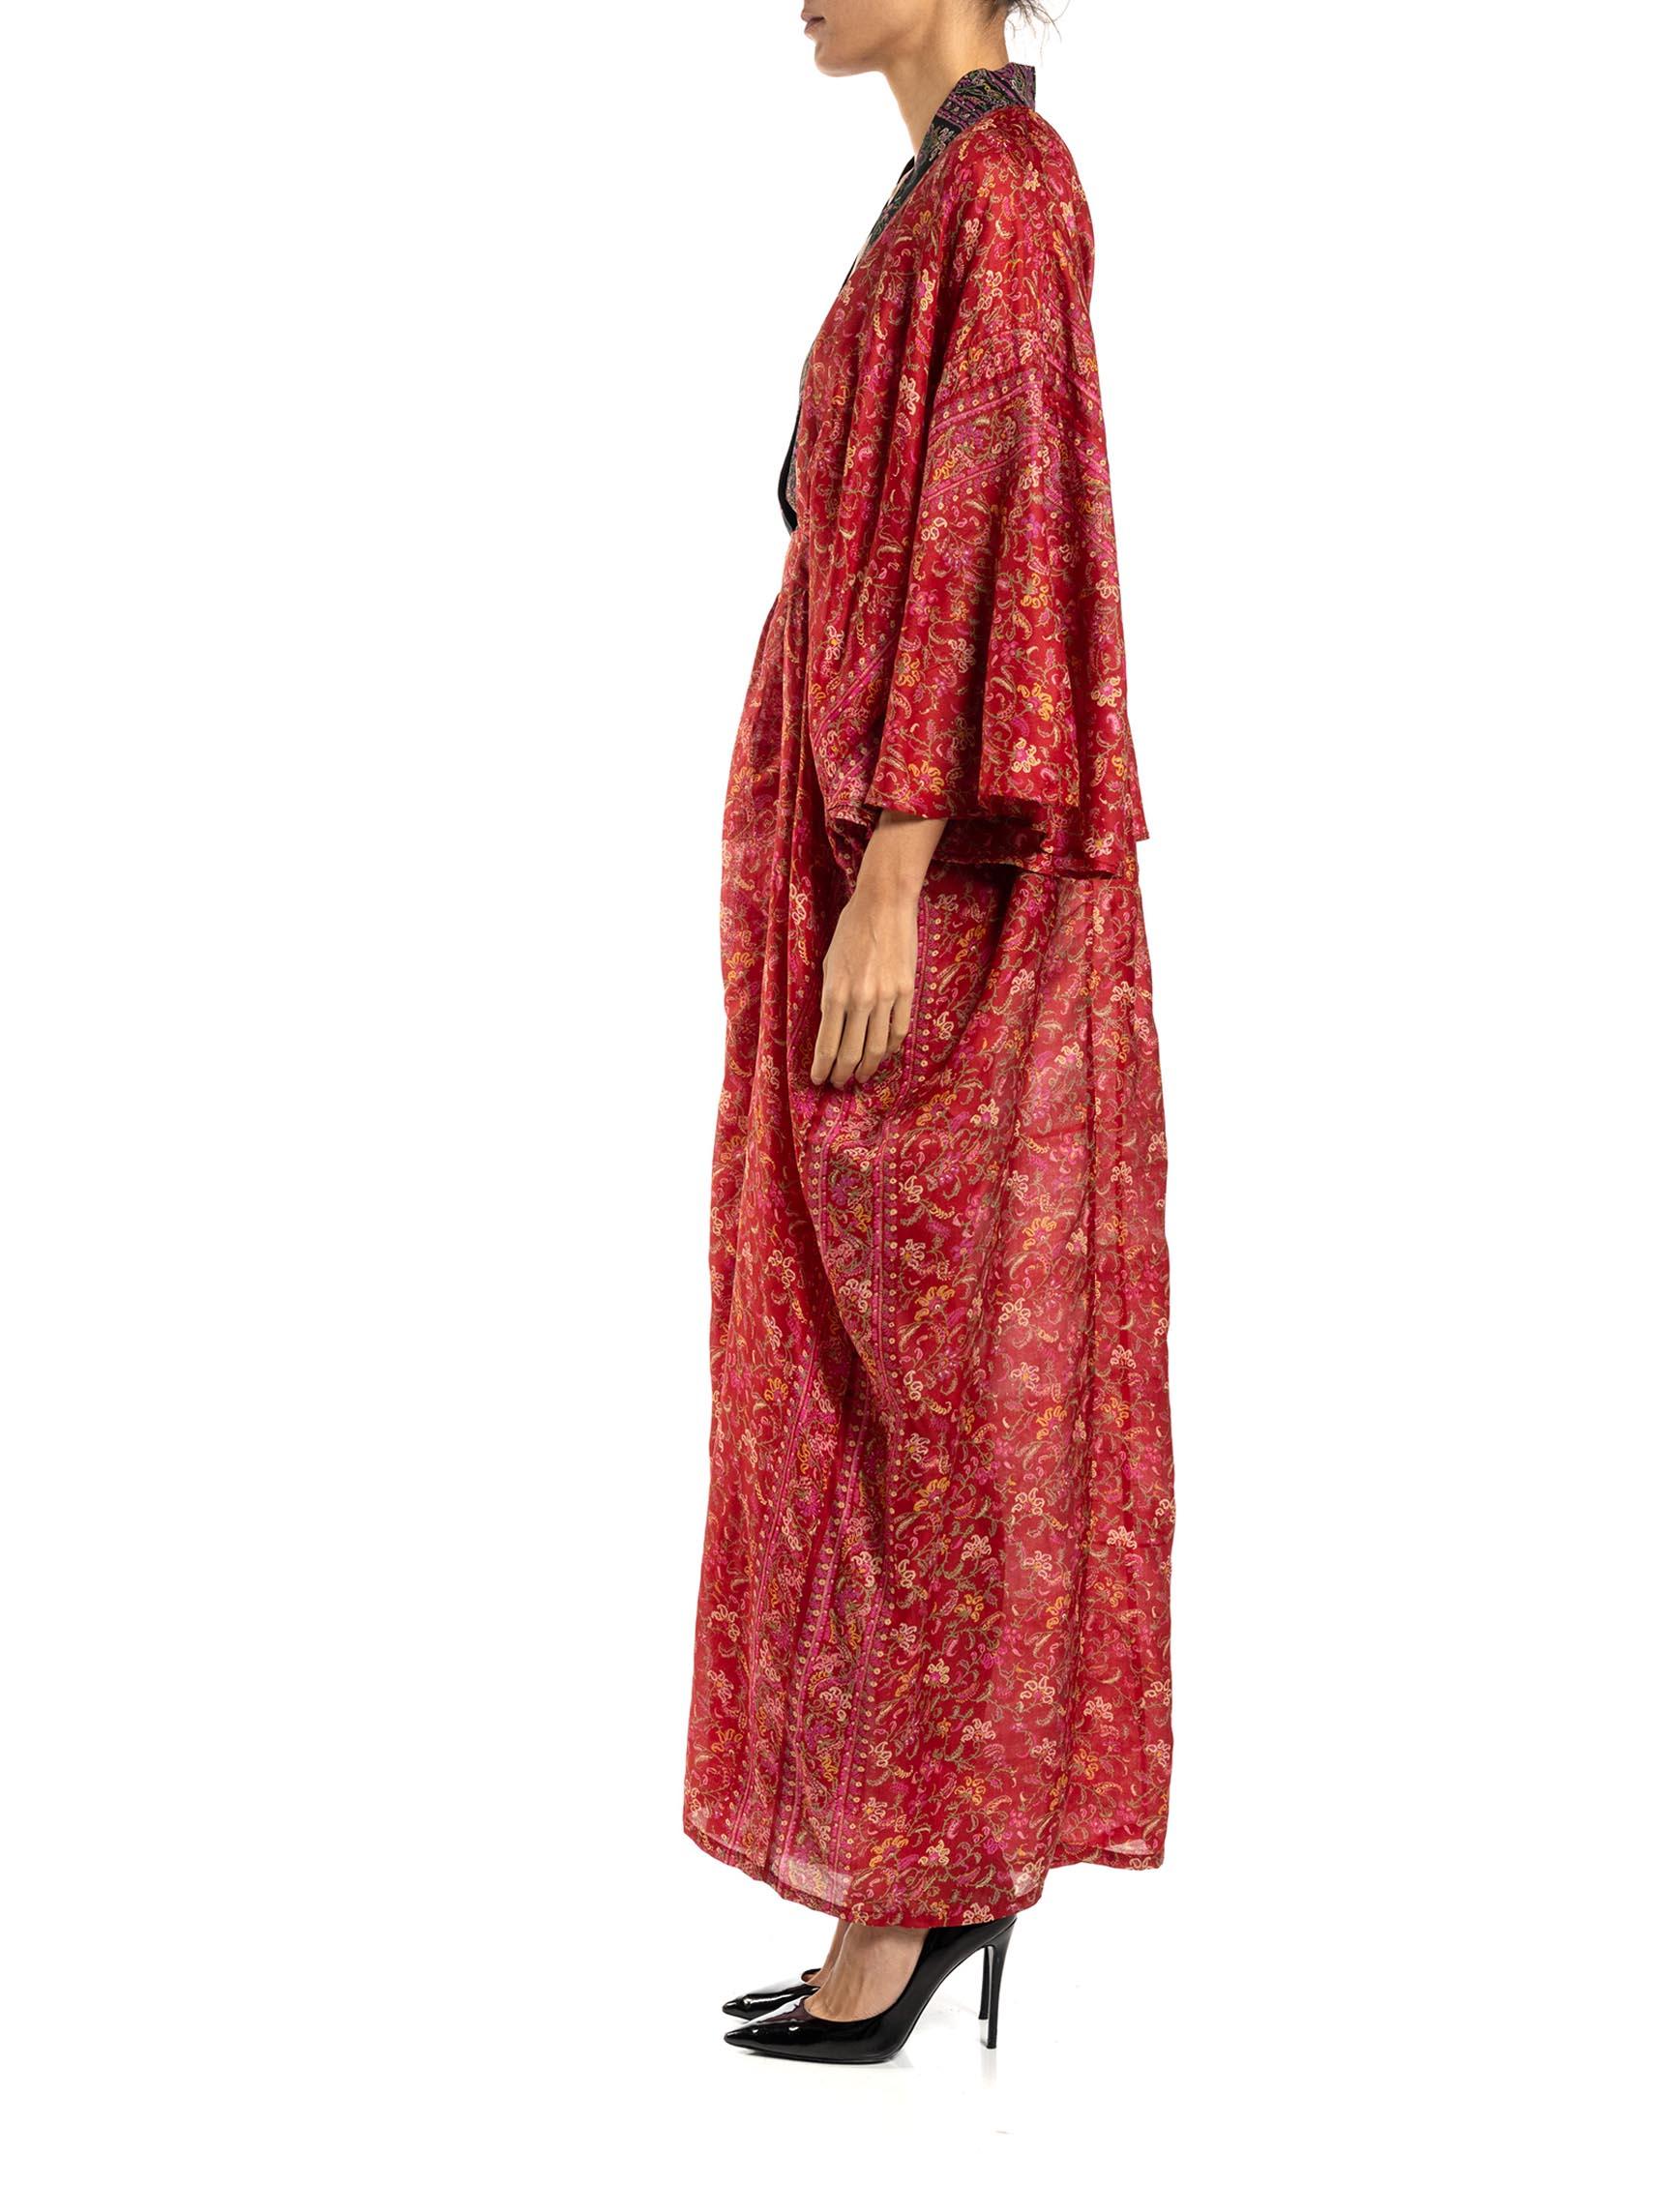 MORPHEW COLLECTION Red & Black Paisley Silk Floral Kaftan Made From Vintage Sari In Excellent Condition For Sale In New York, NY